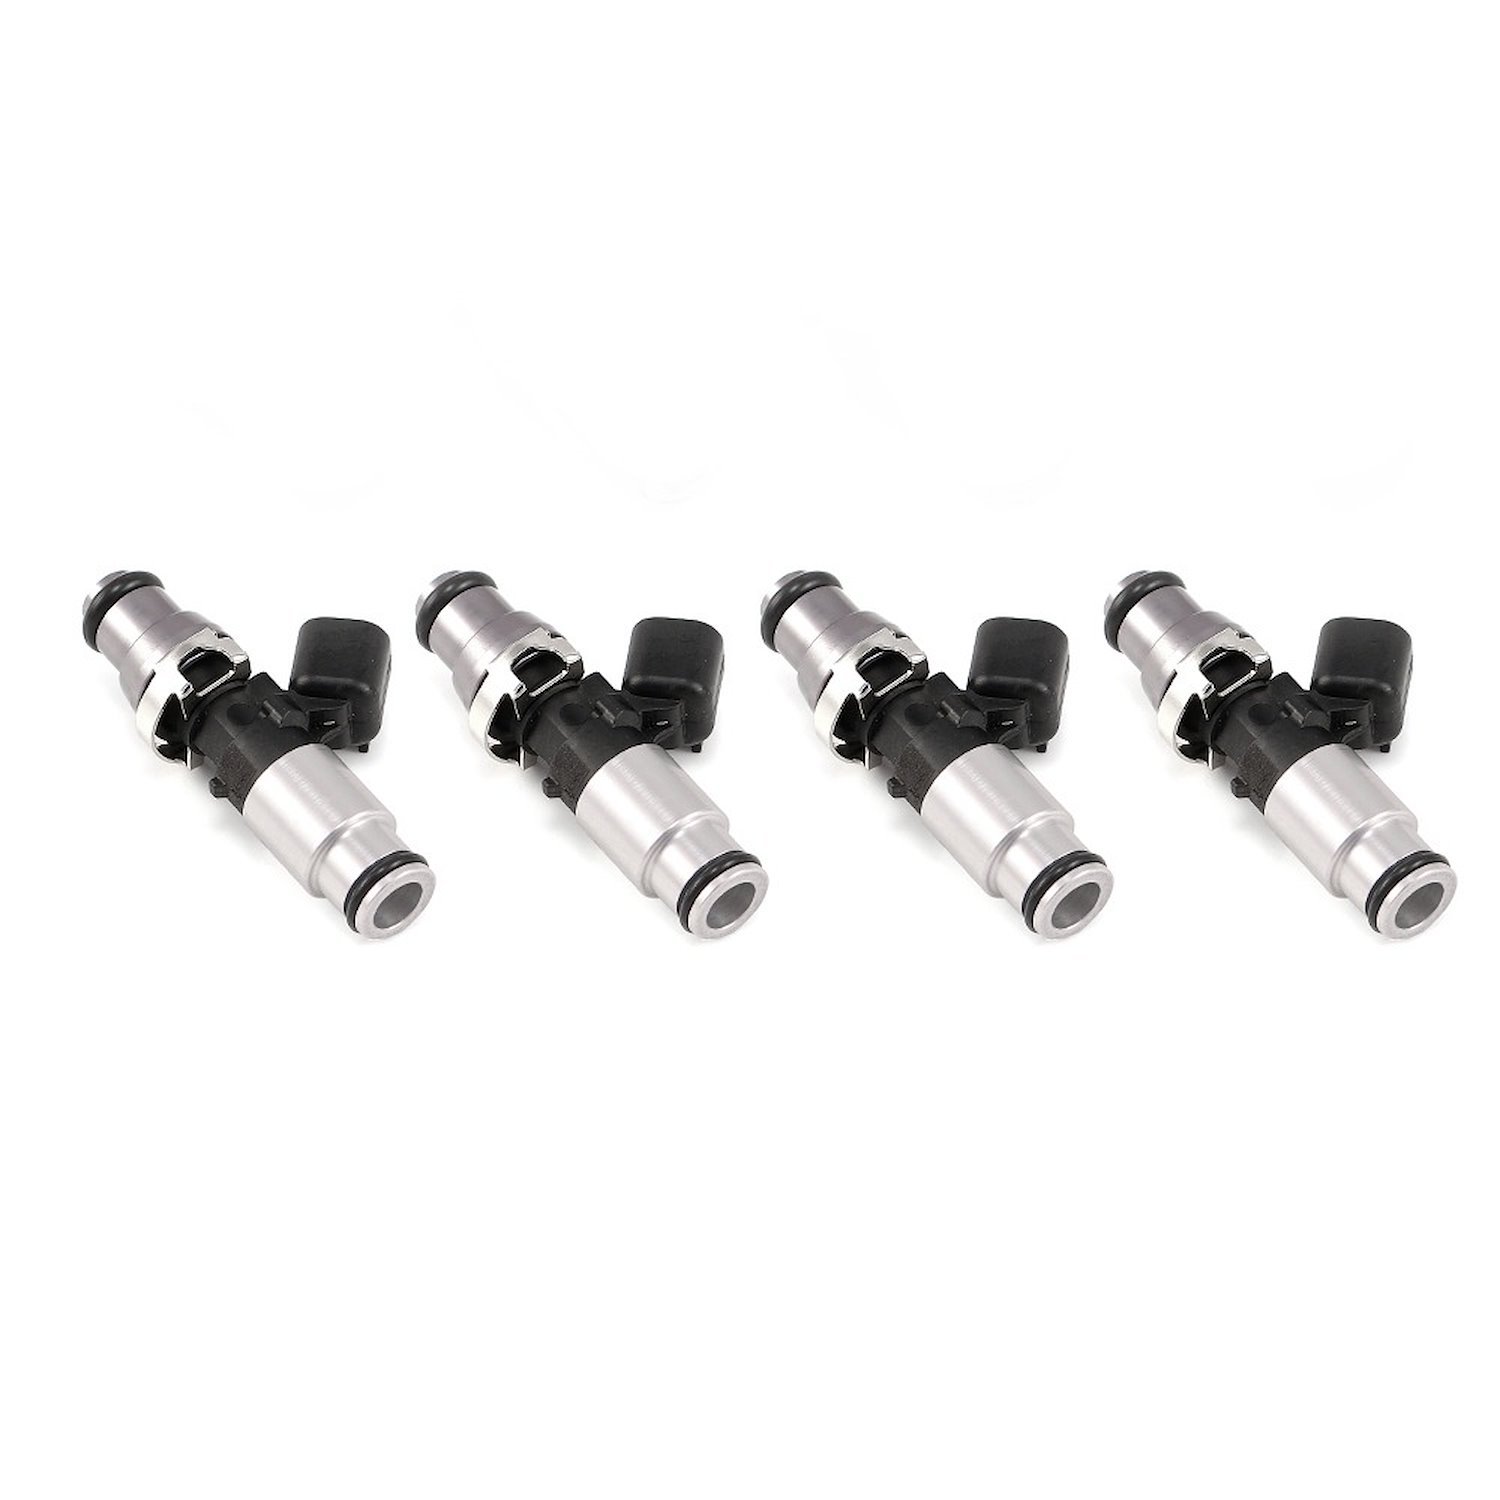 1300.60.14.14B.4 1300cc Fuel Injector Set,- 14 mm Top Adapter (Grey), 14 mm (Silver) Lower O-Ring